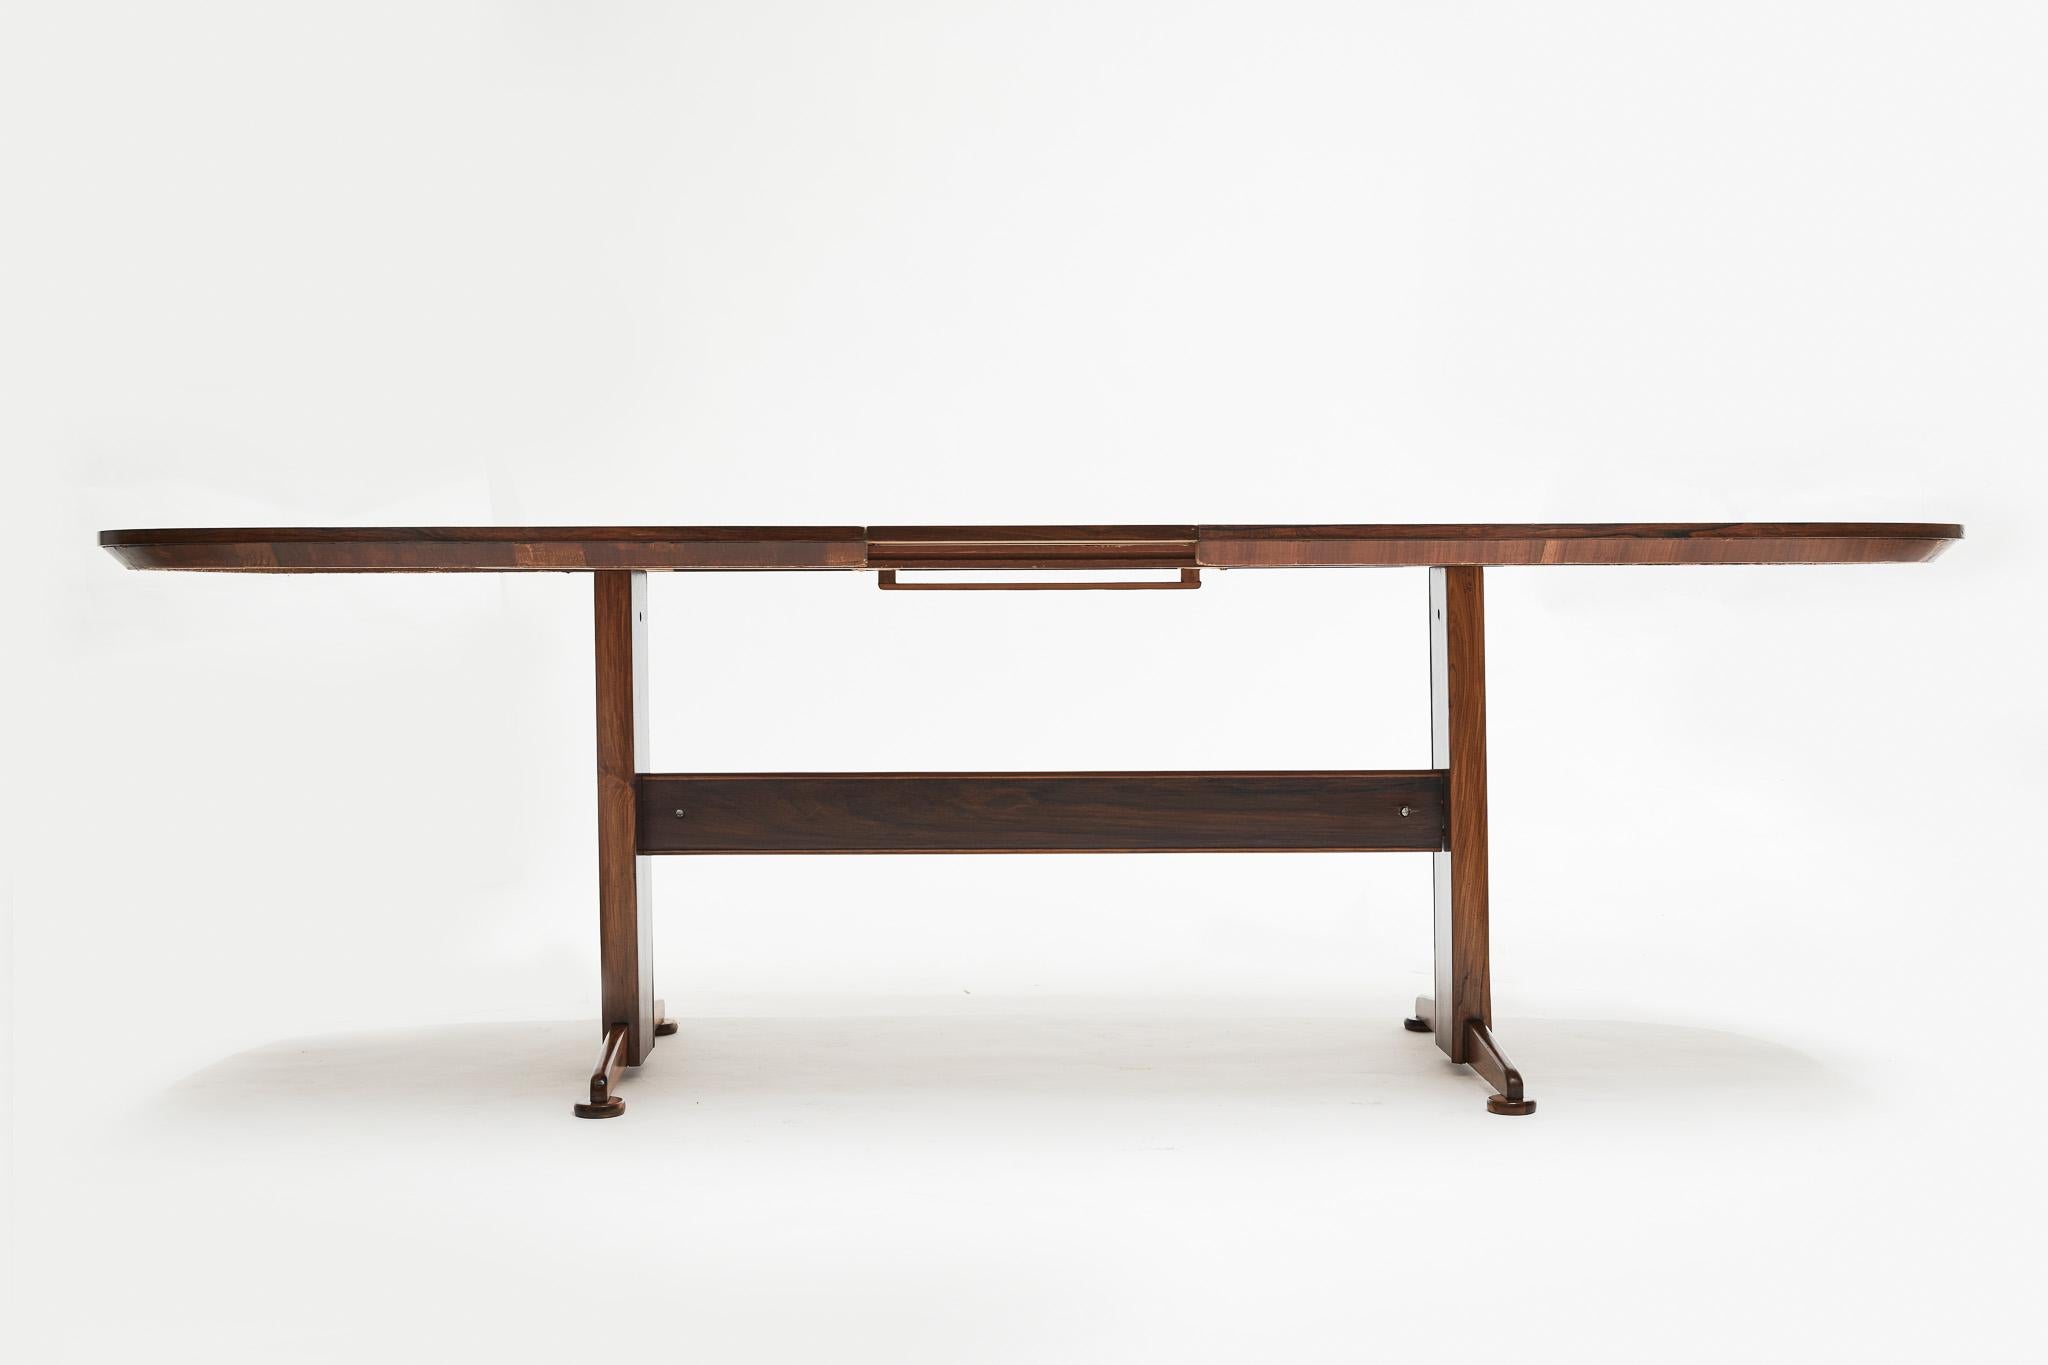 Available today, this magnificent Brazilian Modern Extendable Dining Table in Hardwood from Novo Rumo is gorgeous!

This table is made of Brazilian Rosewood, as known as Jacaranda. The table has an extending board. When is closed, it fits 6 people